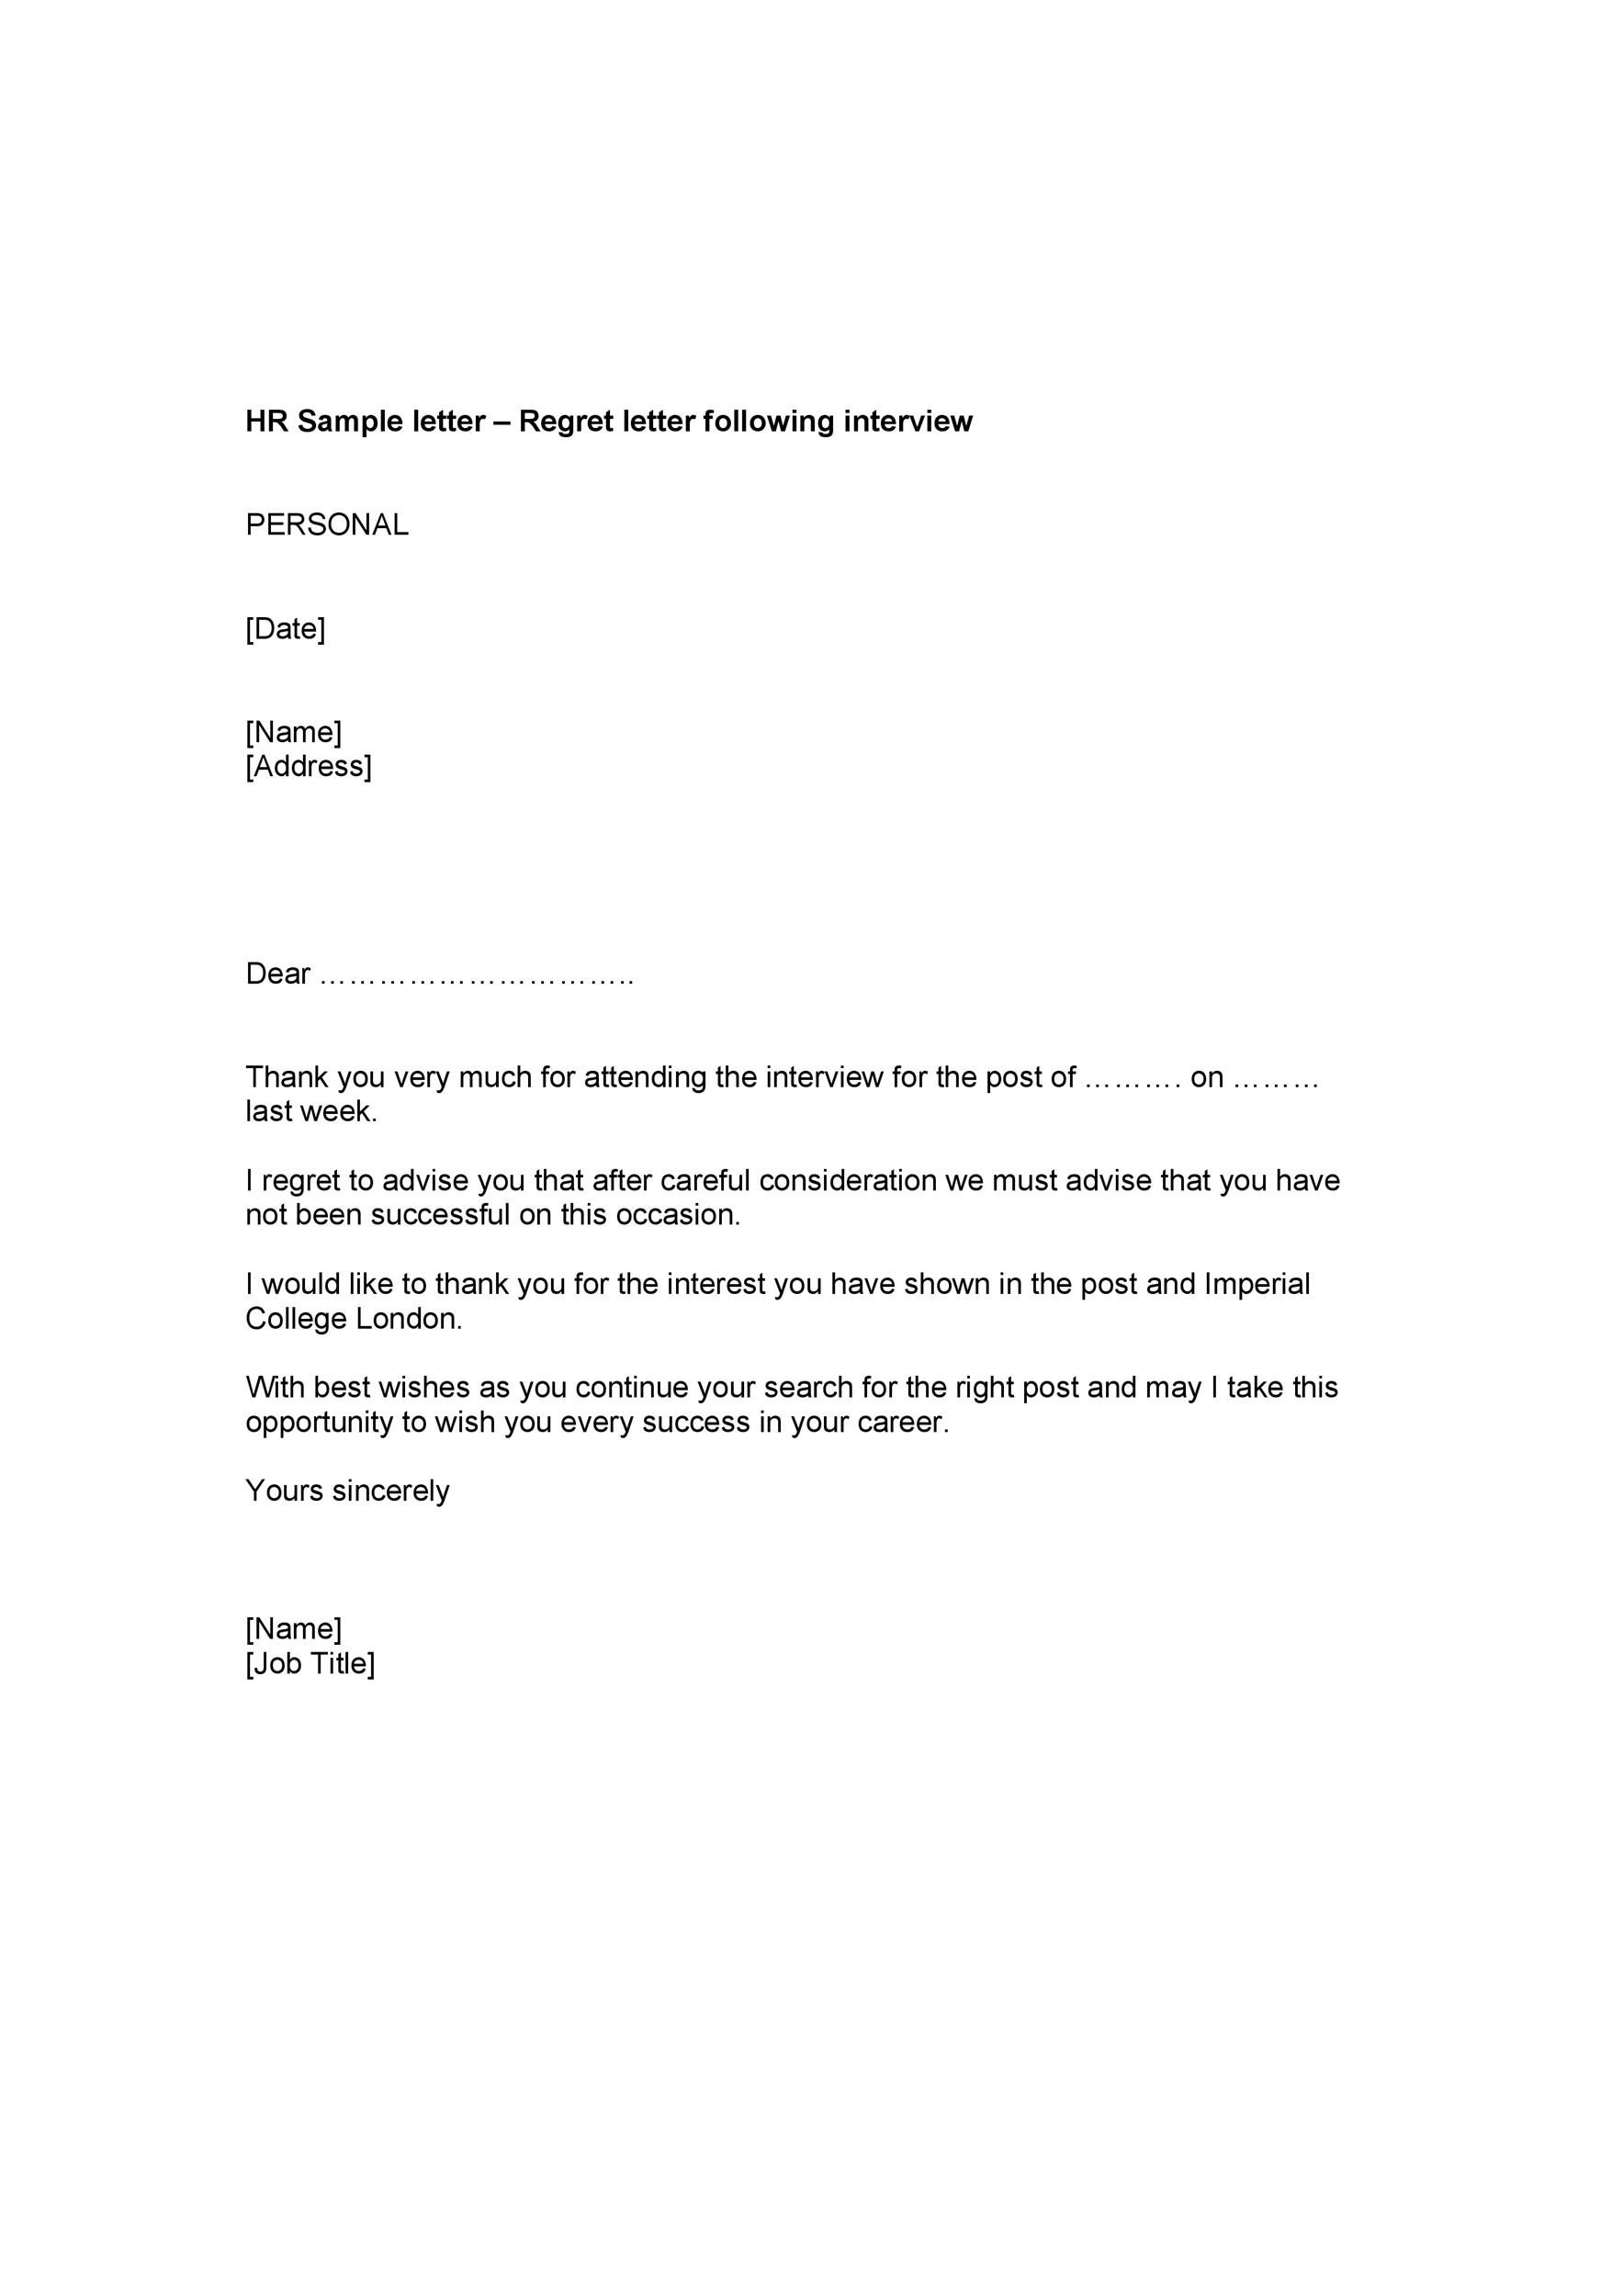 39 Job Rejection Letter Templates And Samples Templatelab